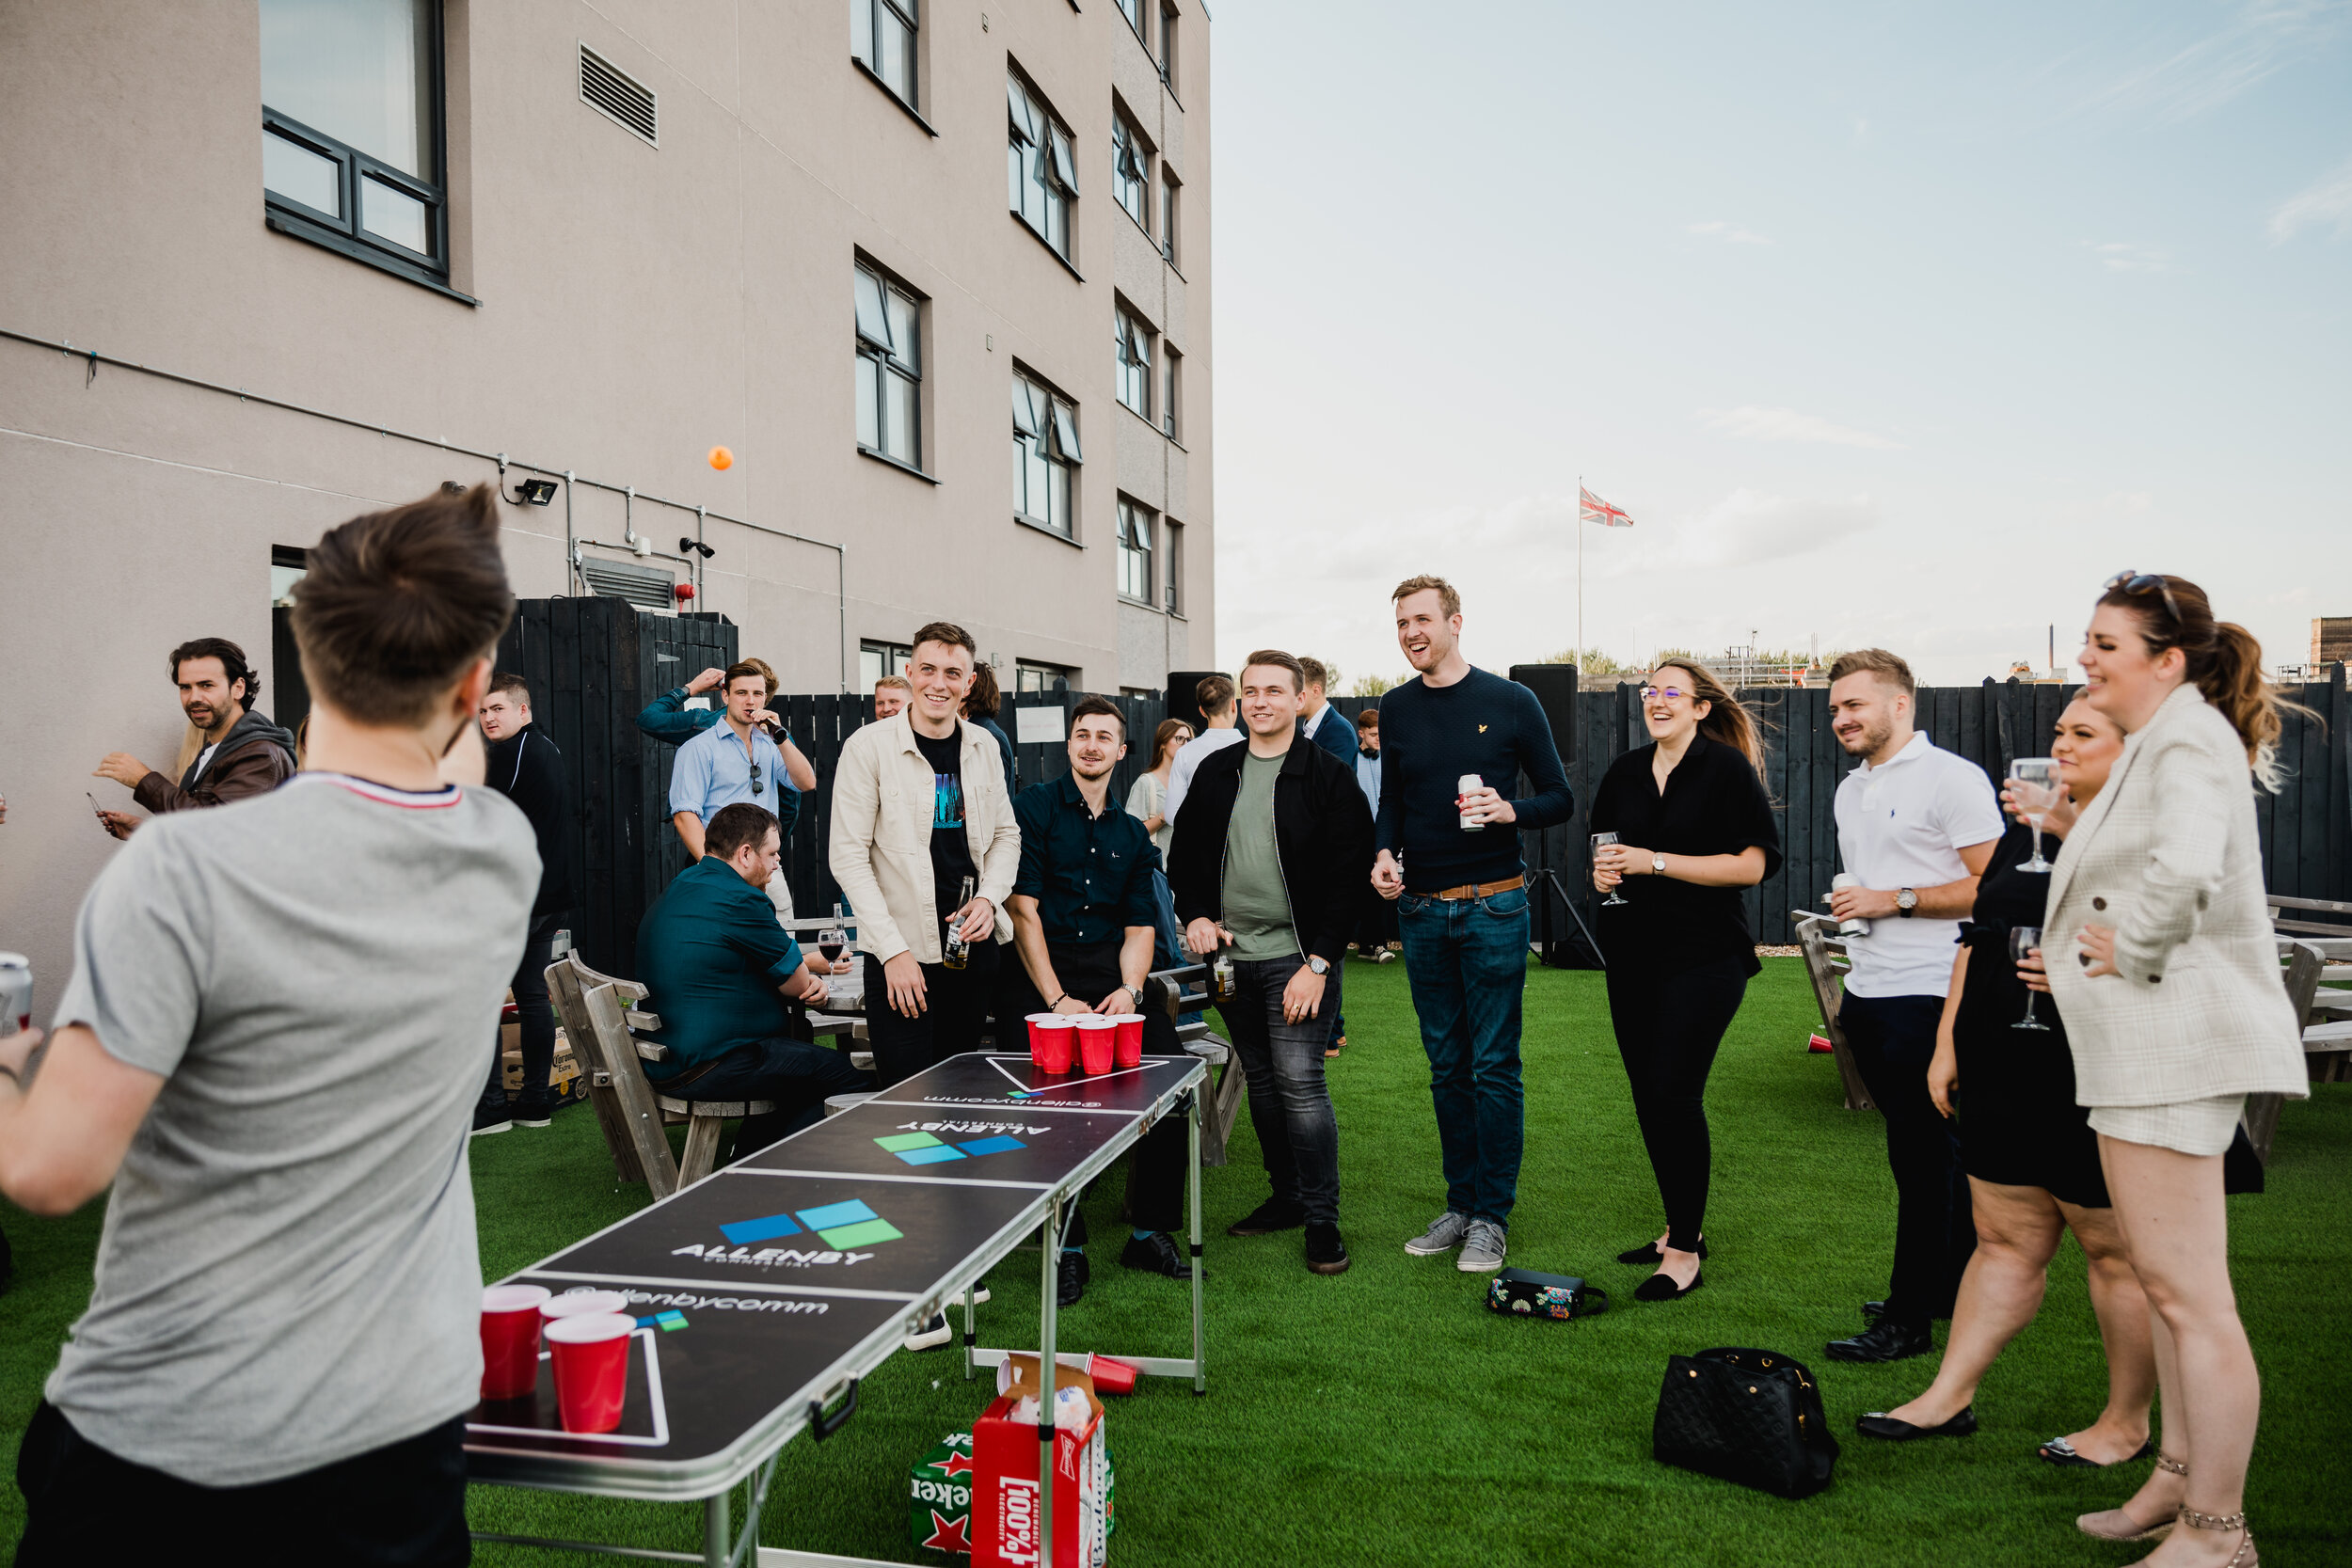 Rooftop BBQ at Essex House - August 21